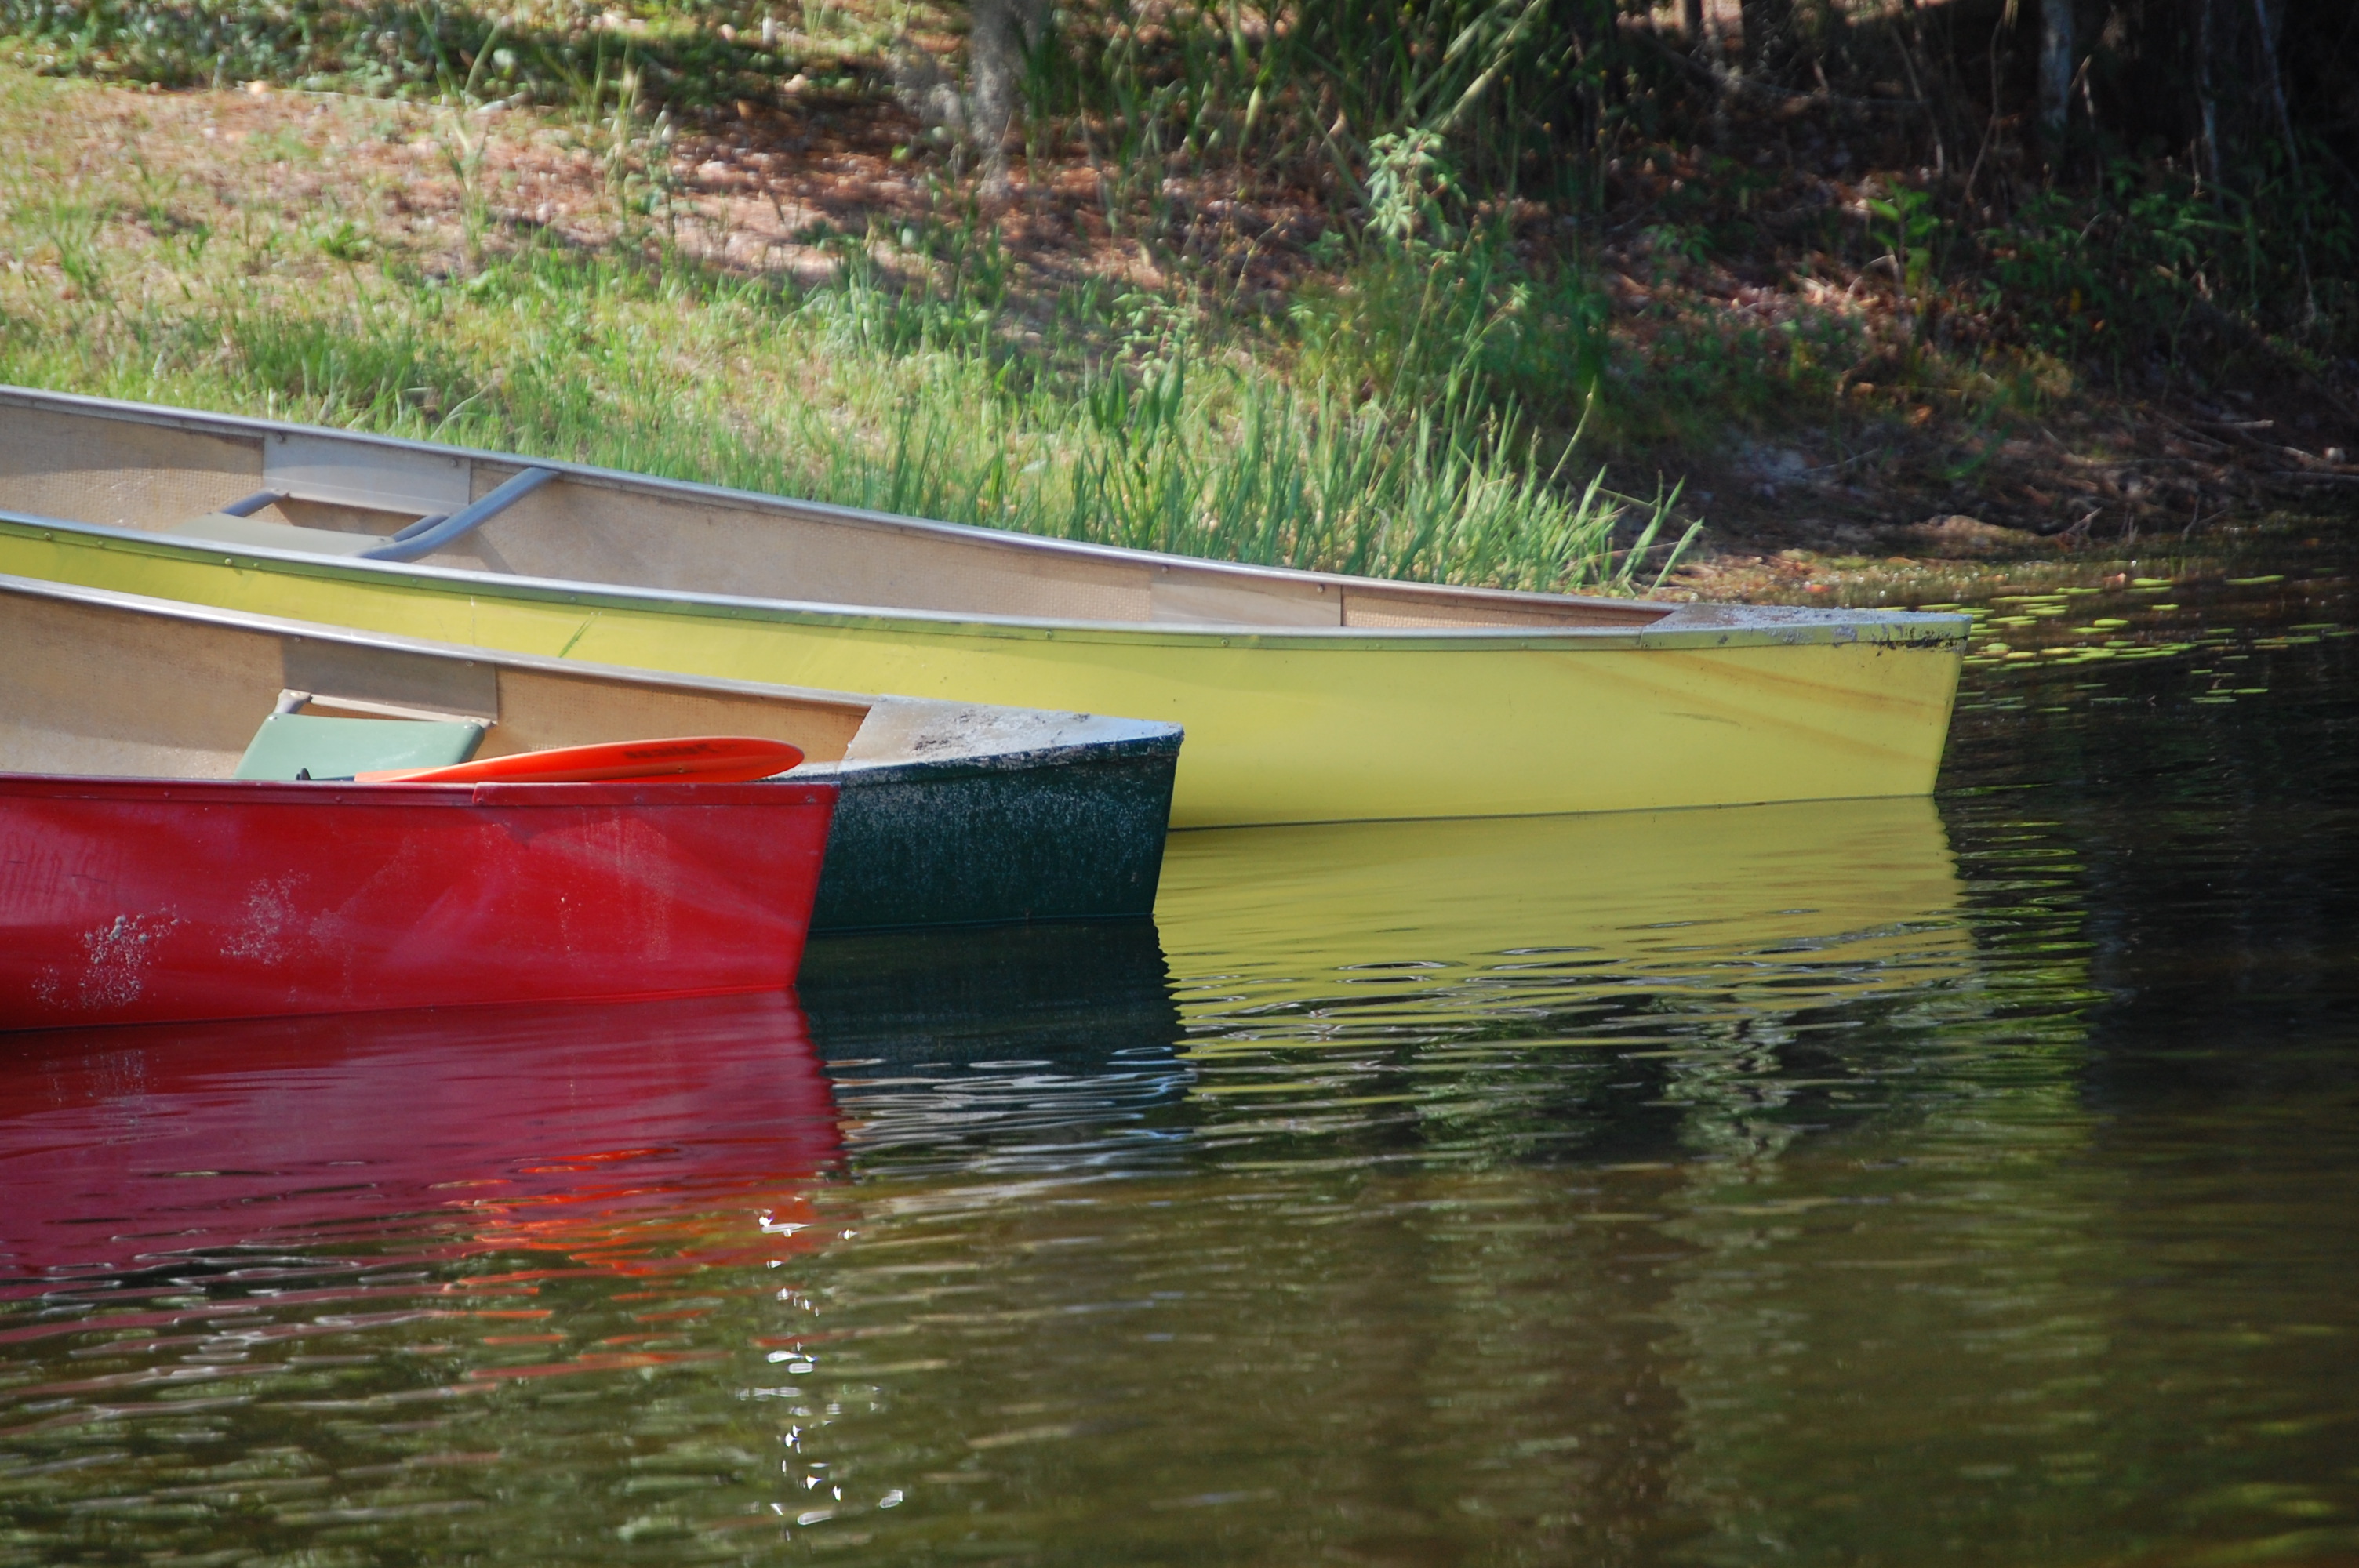 The edges of a red, black, and yellow canoe are dipping into lake water from the shore on the left side of the photo.